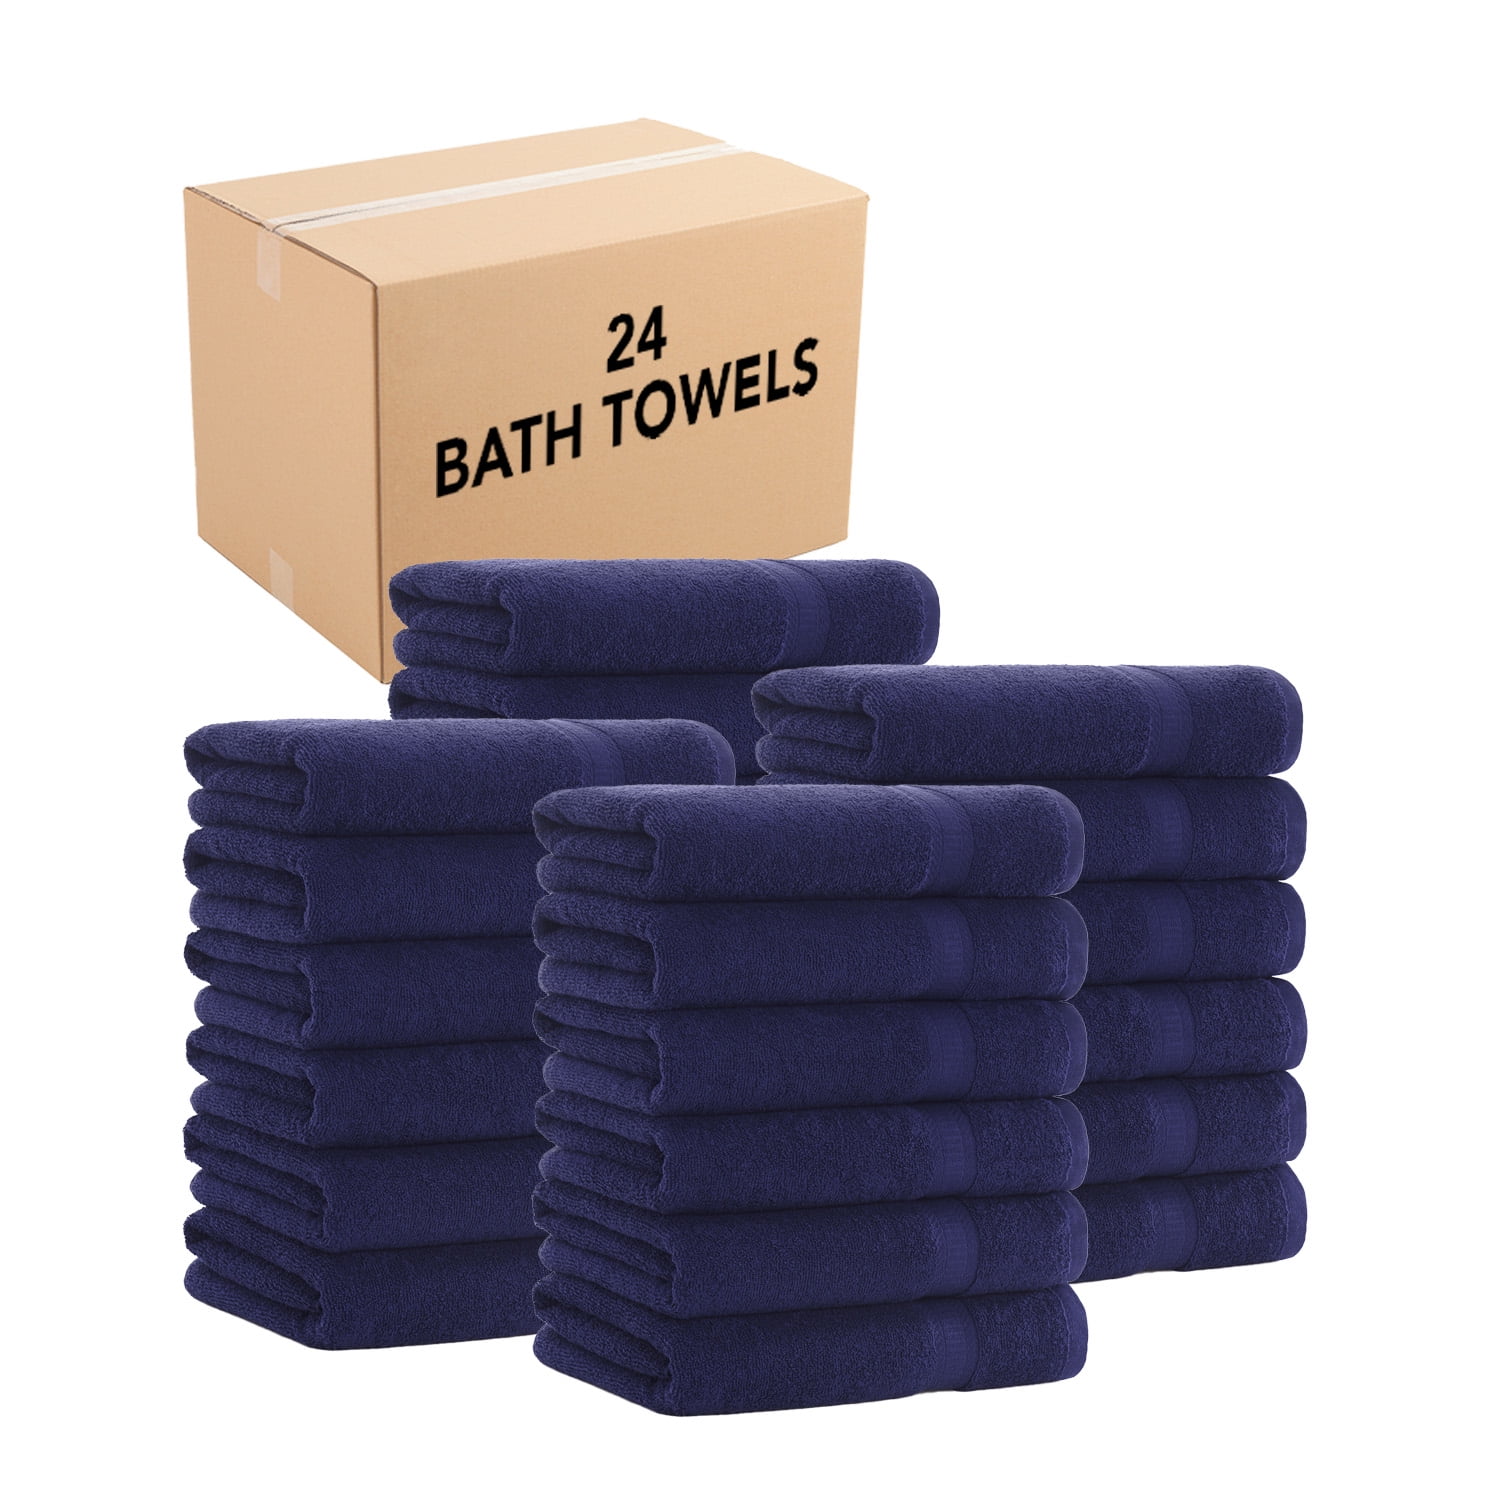 Aware 100% Organic Cotton Ribbed Bath Towels - Hand Towels, 4-Pack,  Navy